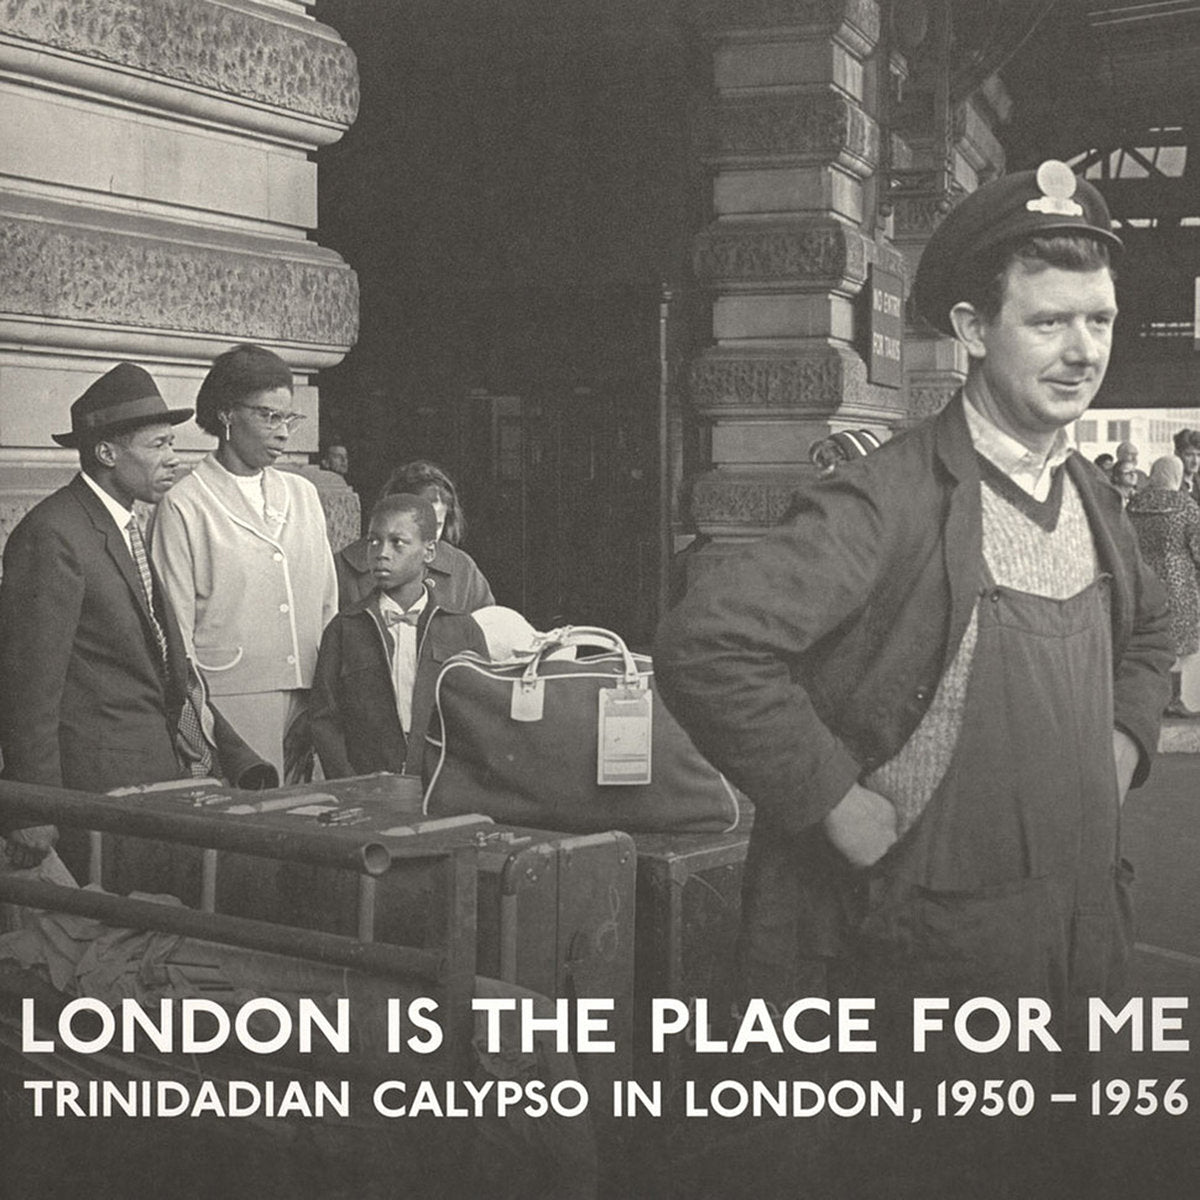 V/A London Is The Place For Me: Trinidadian Calypso In London, 1950 - 1956